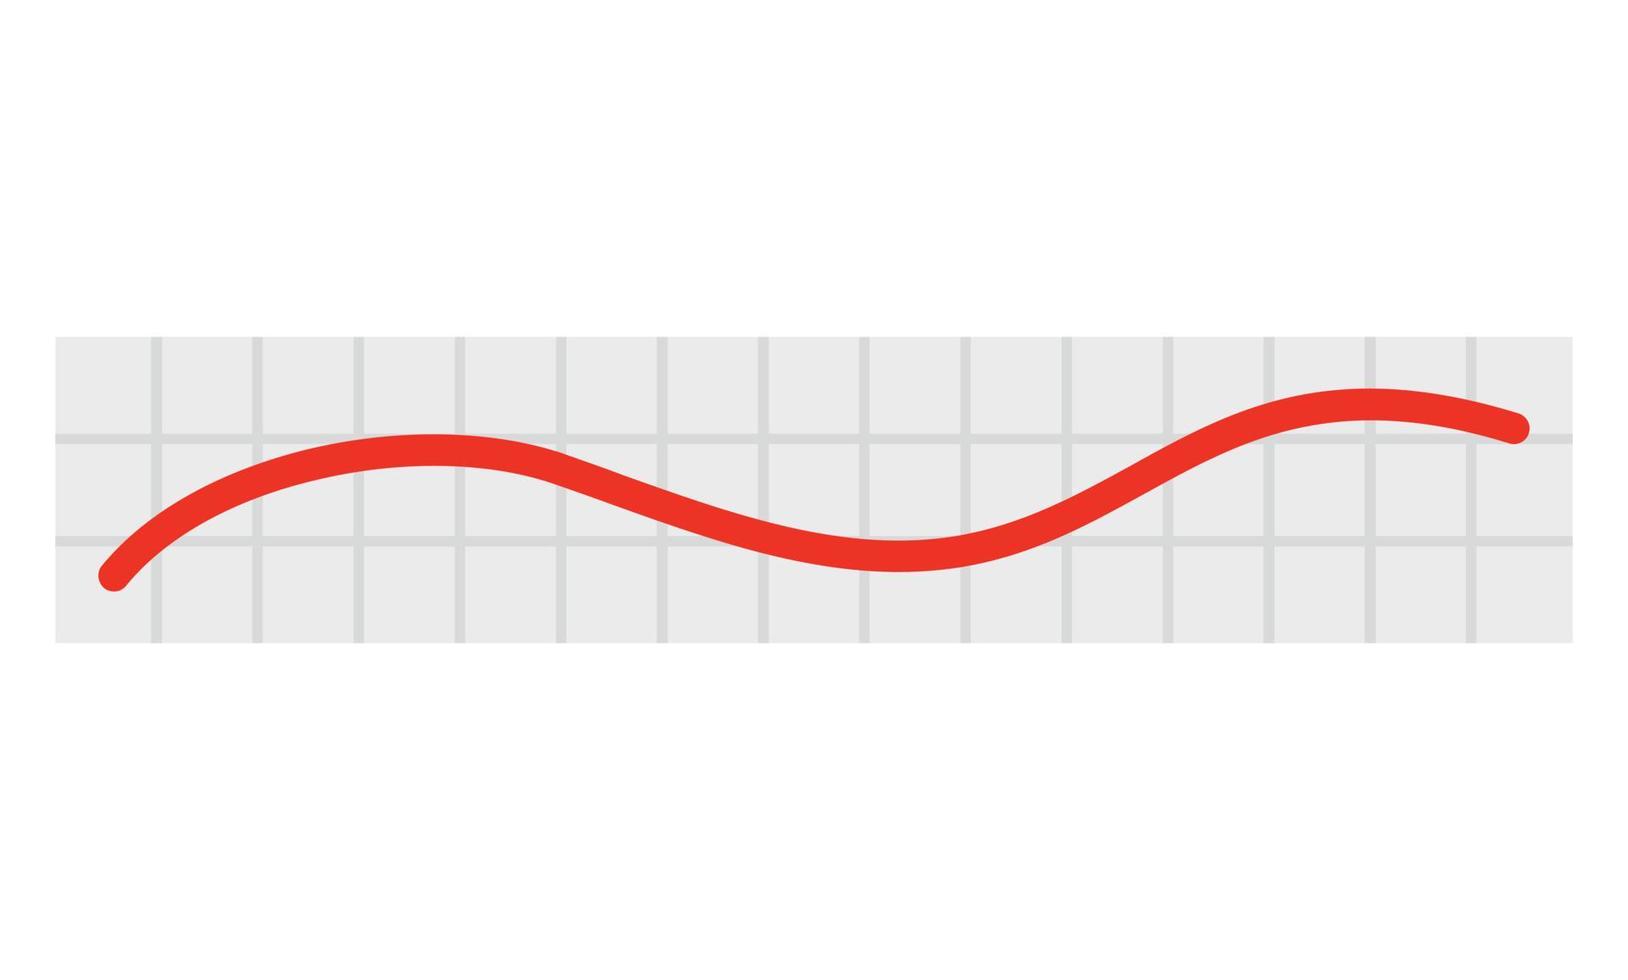 Red linear graph chart icon, flat style vector